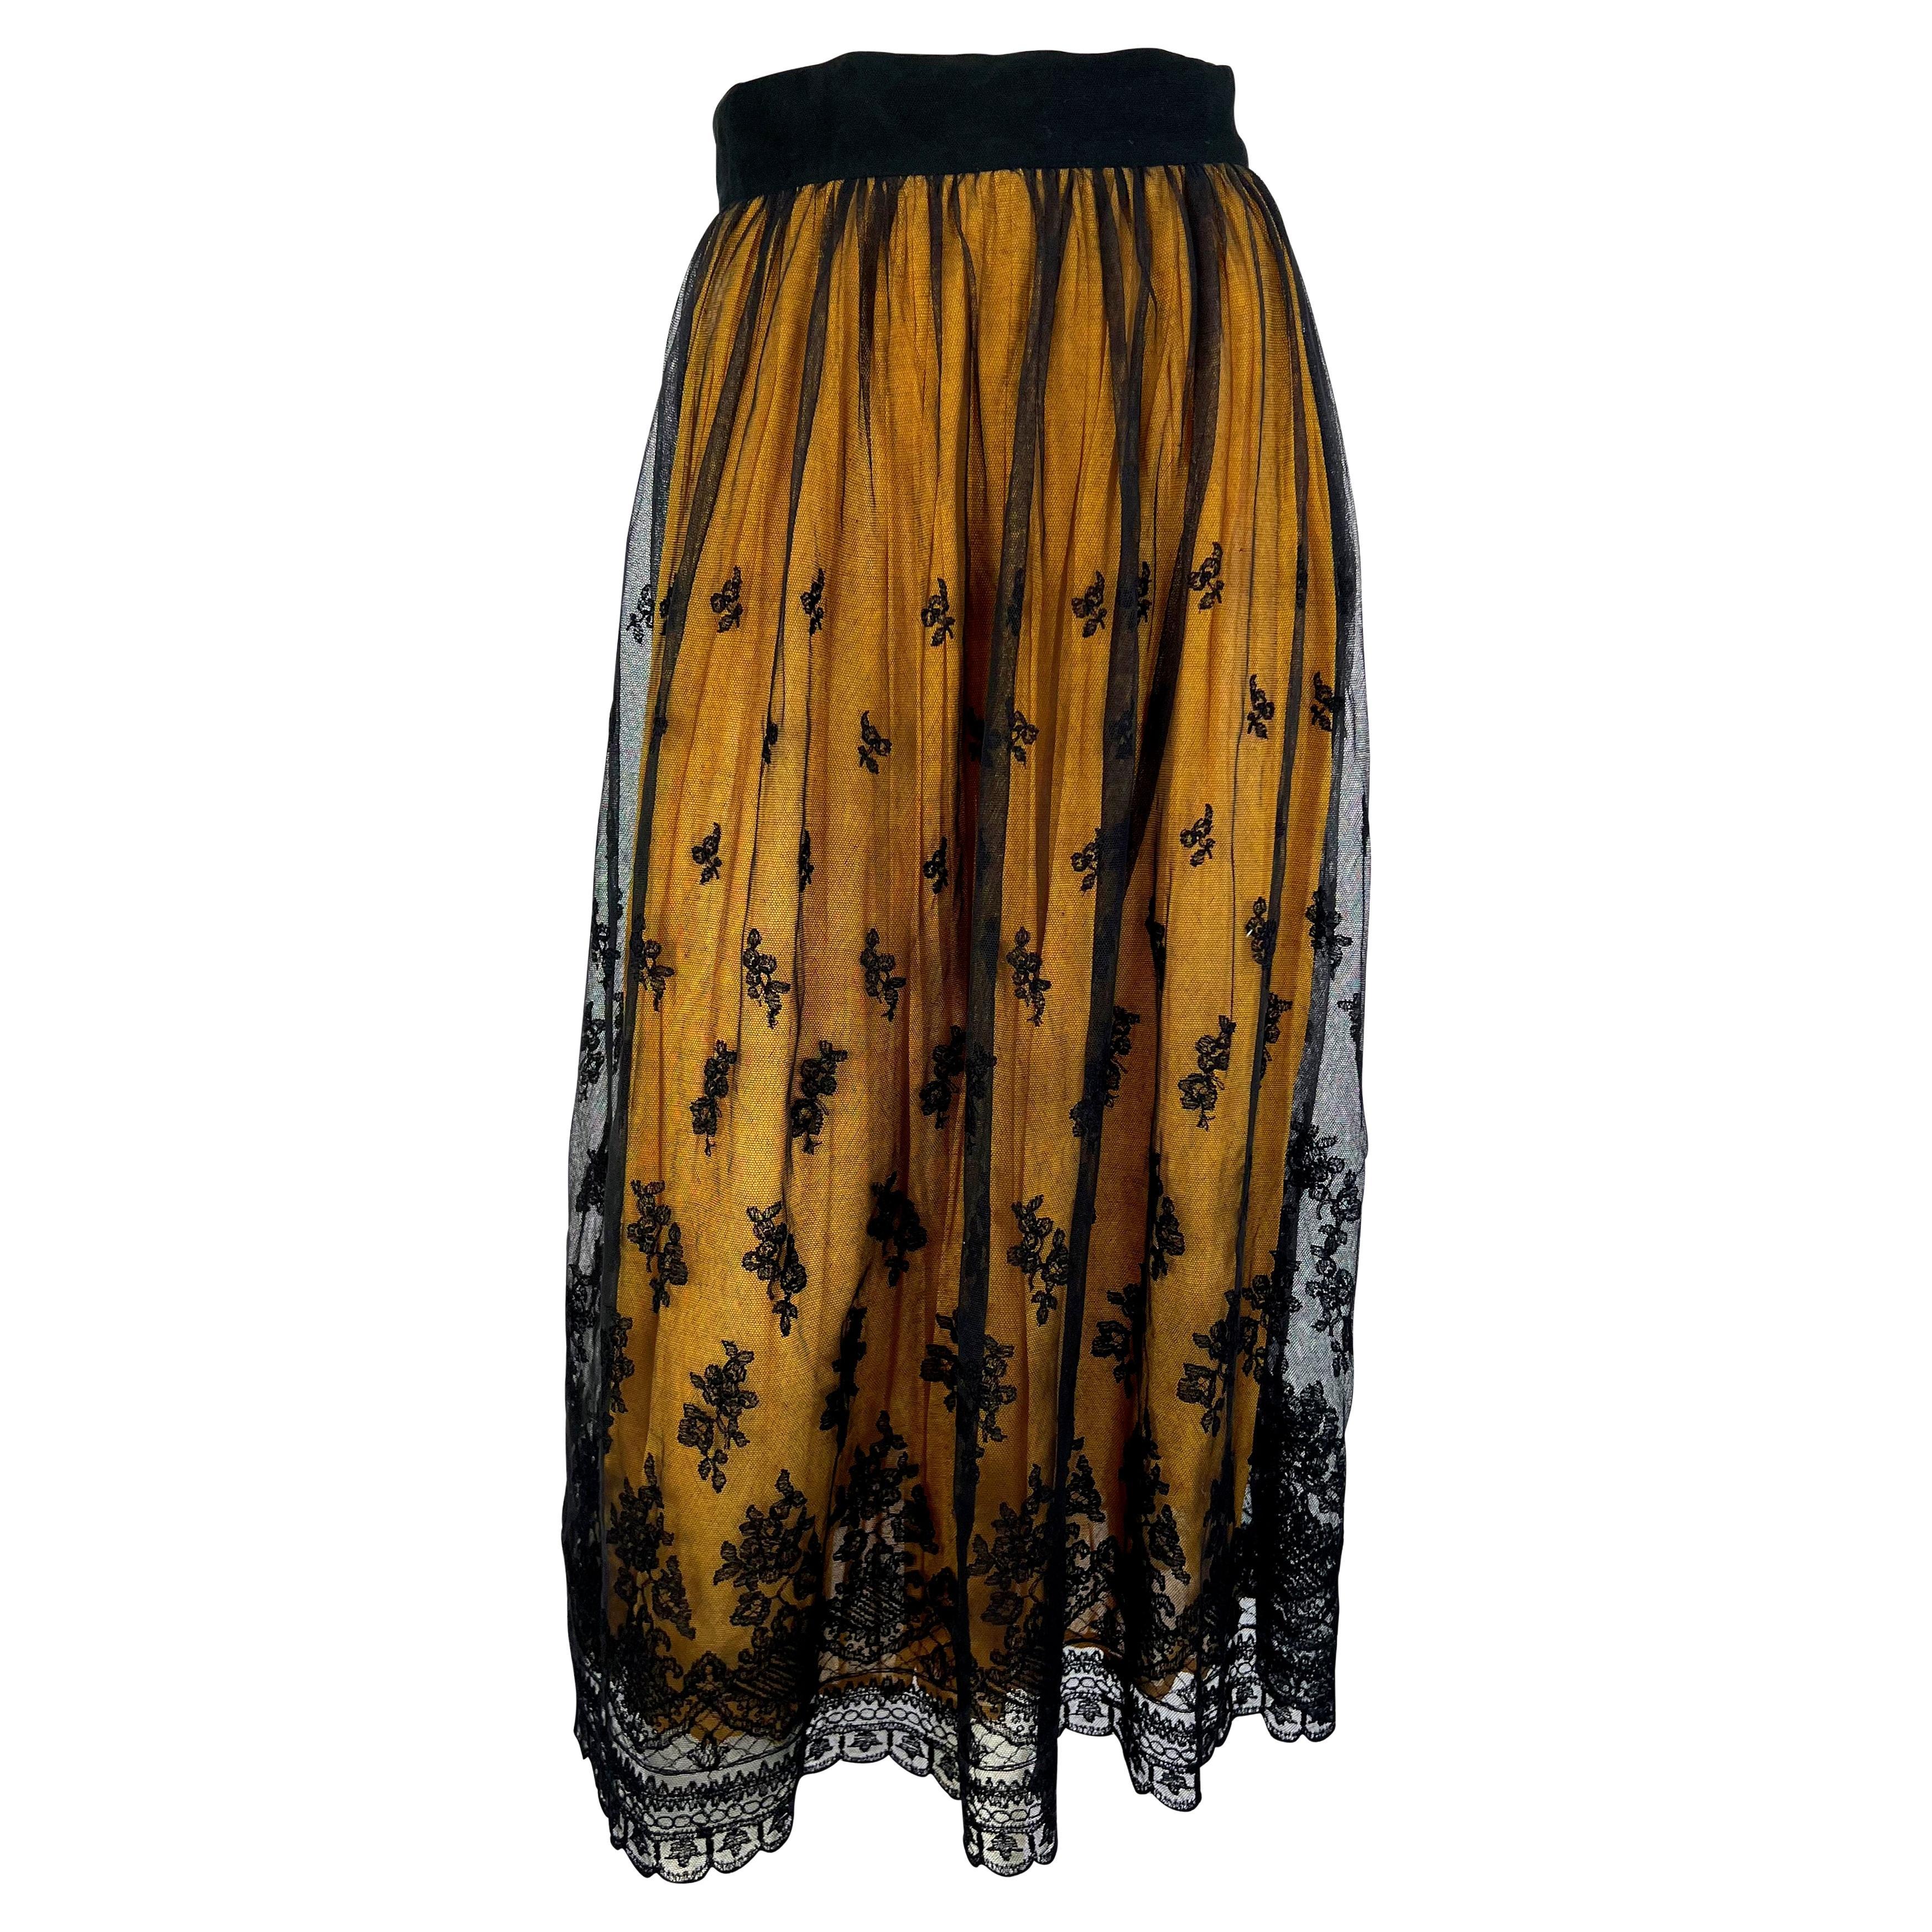 1990s Dolce & Gabbana Black Lace Overlay Yellow Sheer Flared Maxi Skirt For Sale